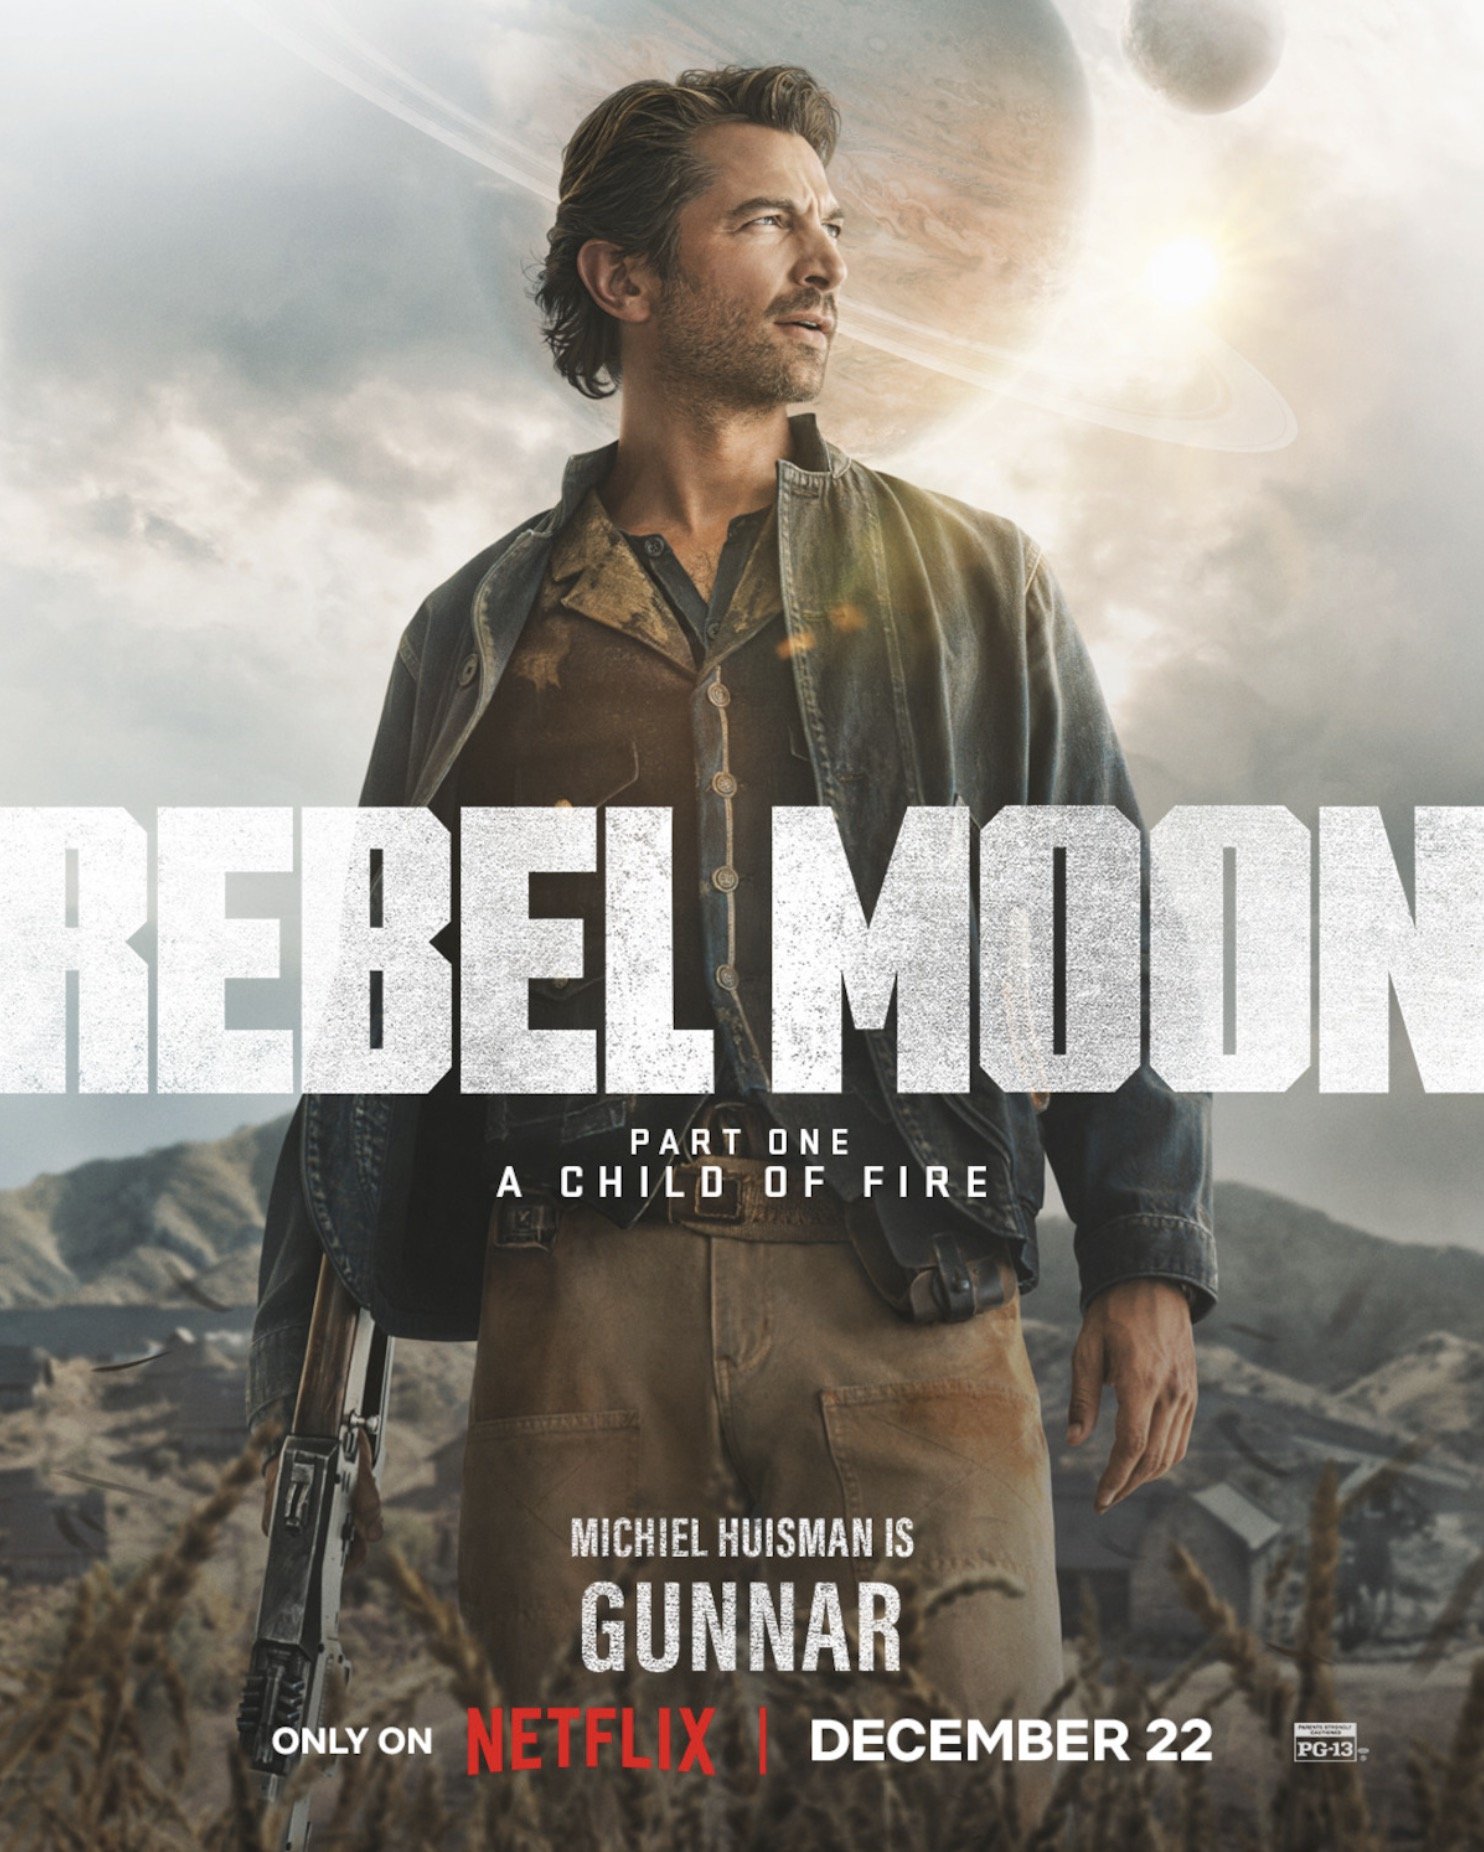 Rebel Moon Part One: A Child of Fire Review: IT'S EPIC! 